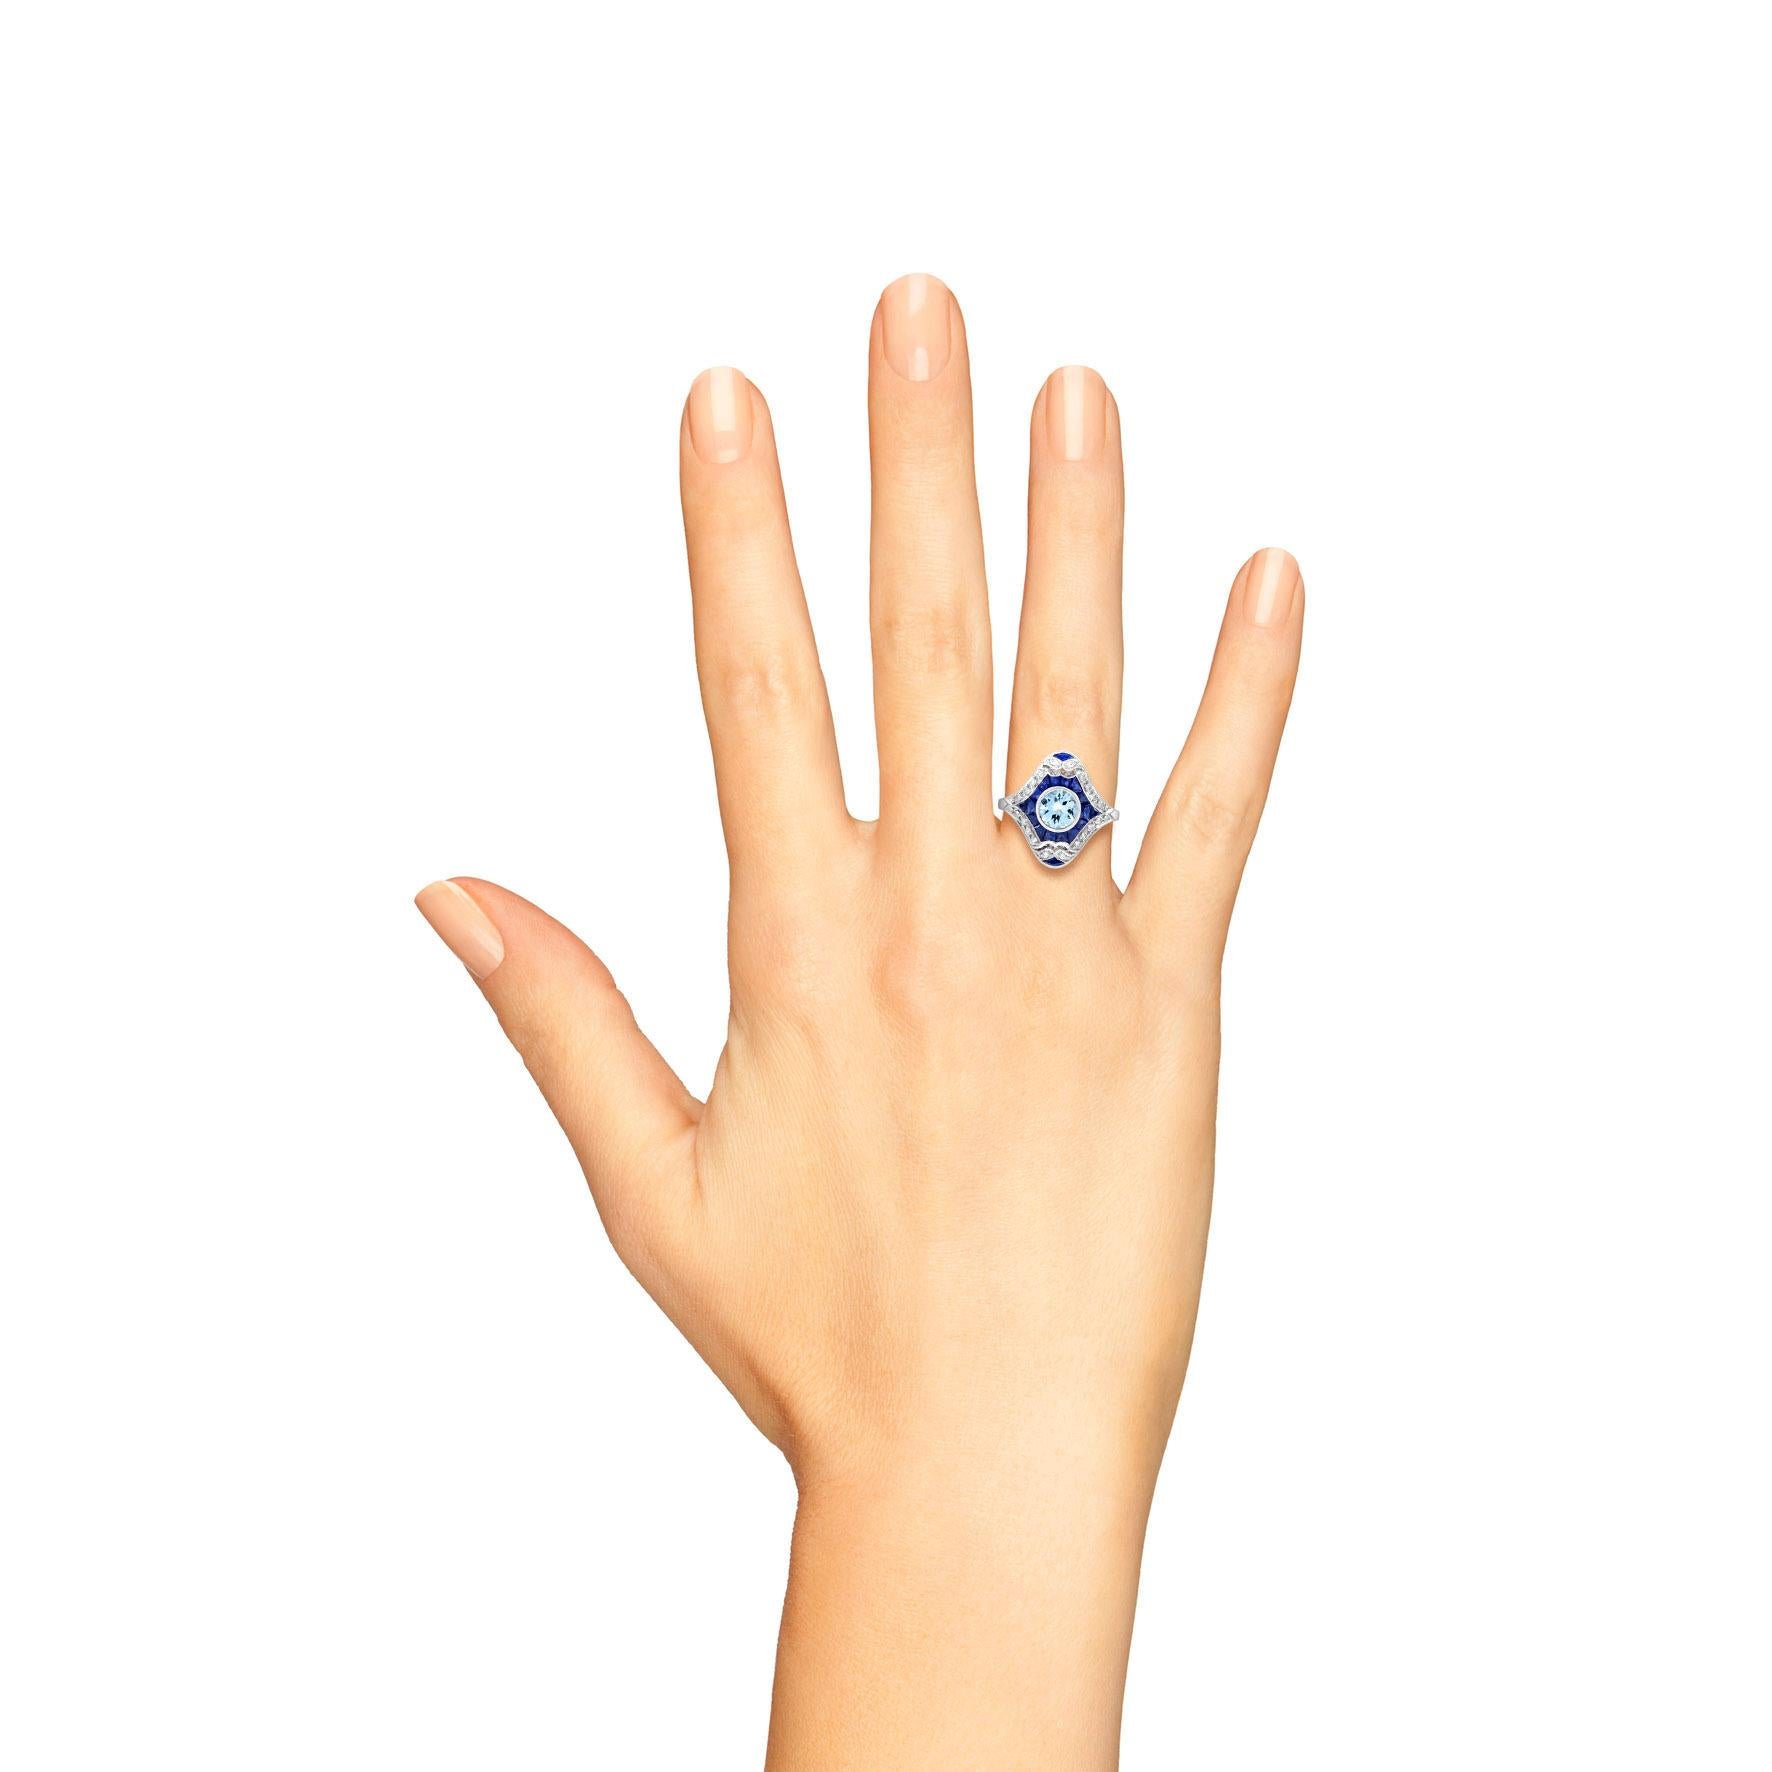 Art Deco inspired 18k white gold, with center aquamarine. In additional, there are eight-teen French cut blue sapphire. The ring also has additional diamond accent of .20 carat. It is an excellent choice for a stylish engagement or right hand ring